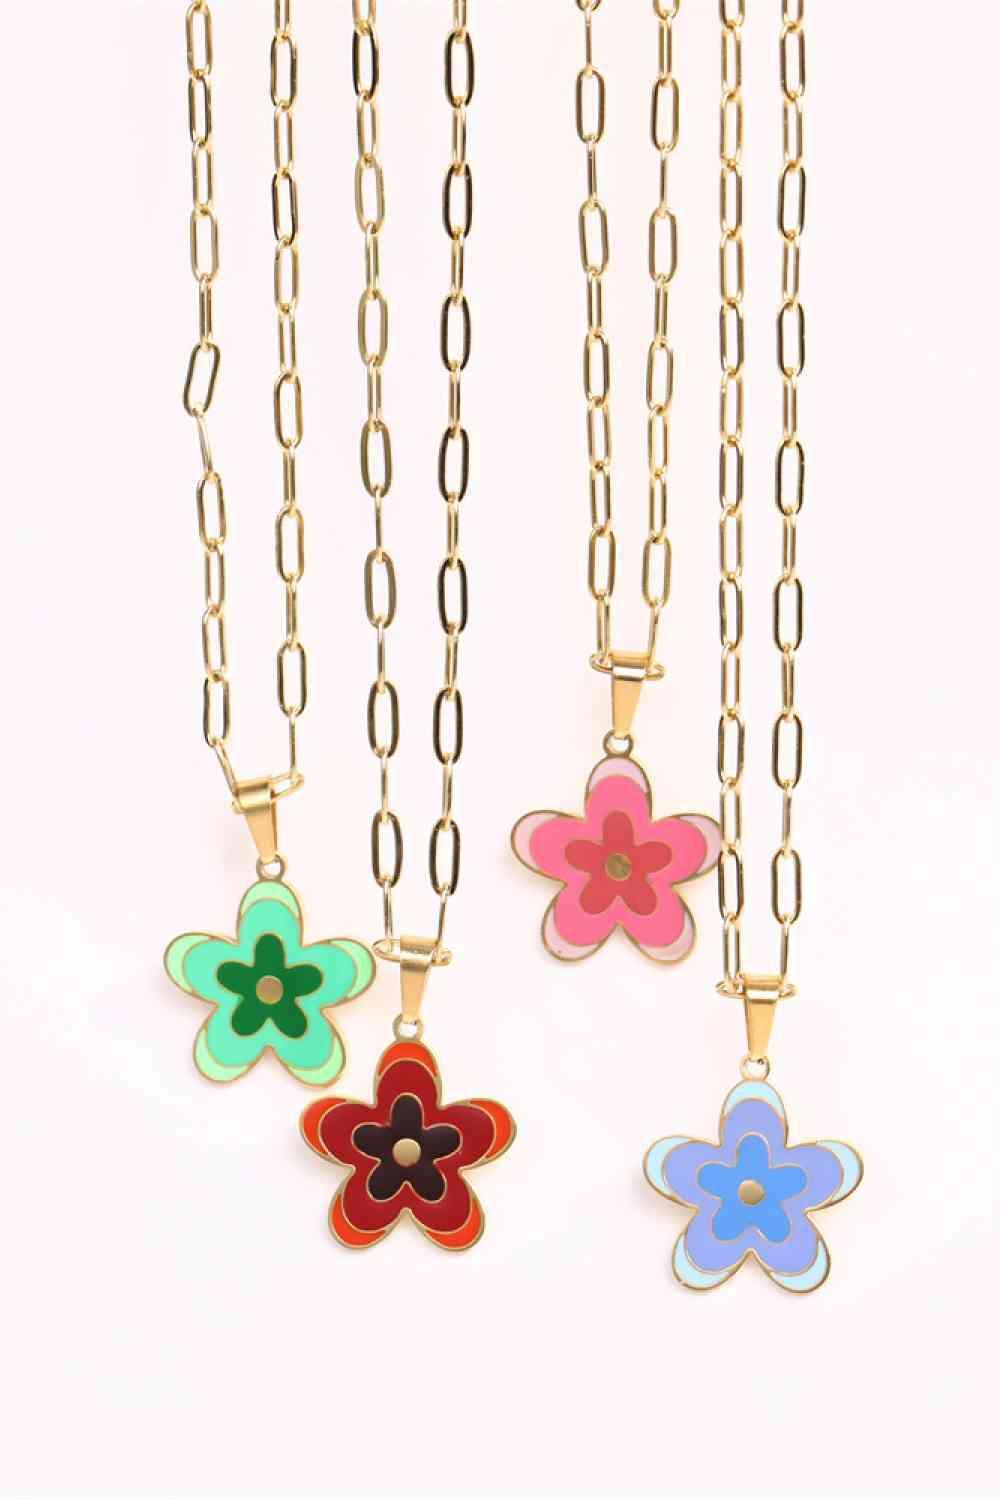 Necklaces - God's Girl Gifts And Apparel